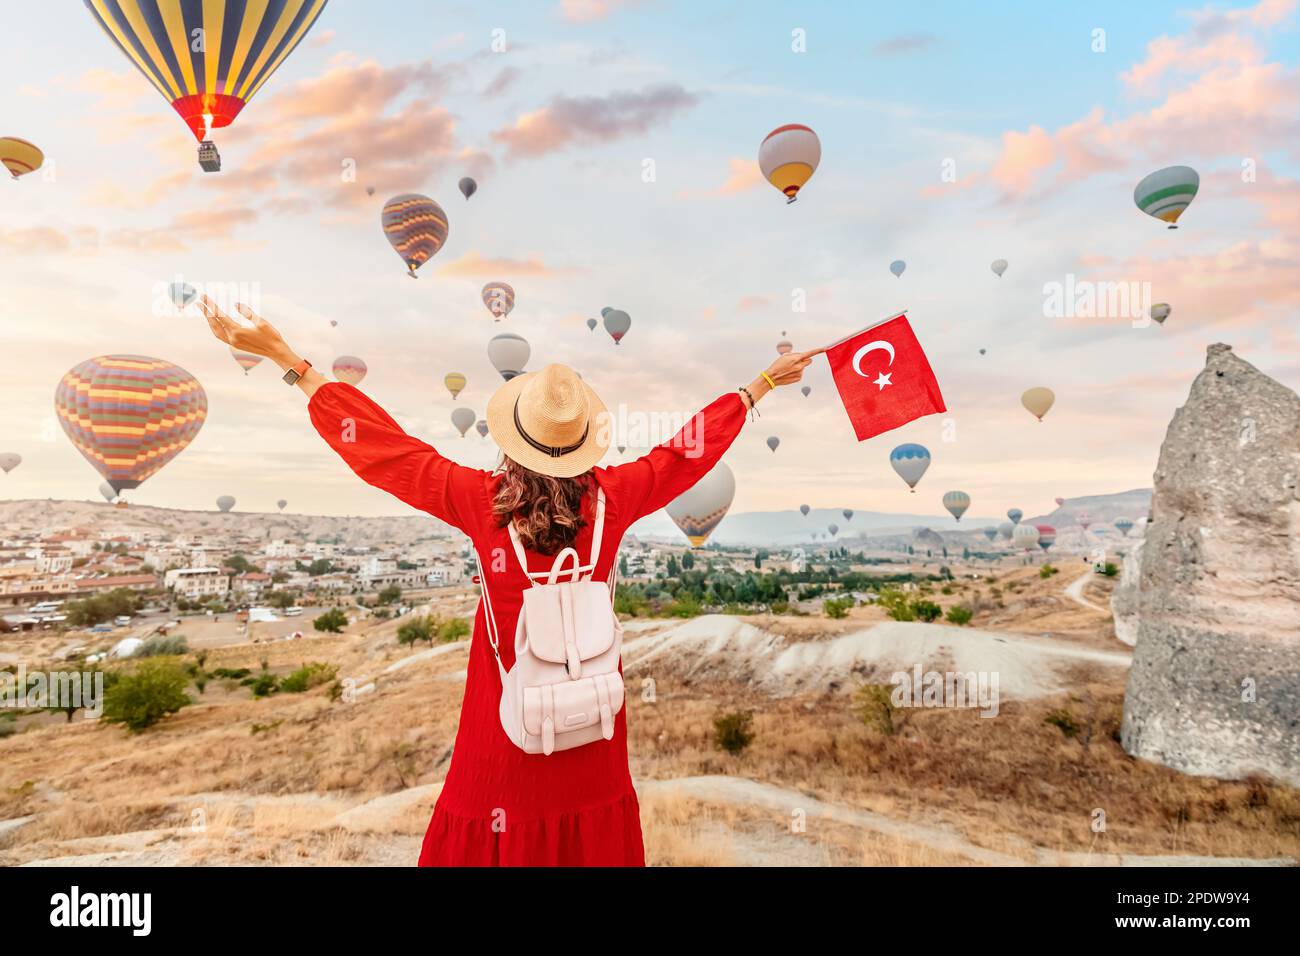 Join a young woman as she watches the iconic hot air balloons of Cappadocia, Turkey while proudly displaying the Turkish flag. A celebration of the co Stock Photo